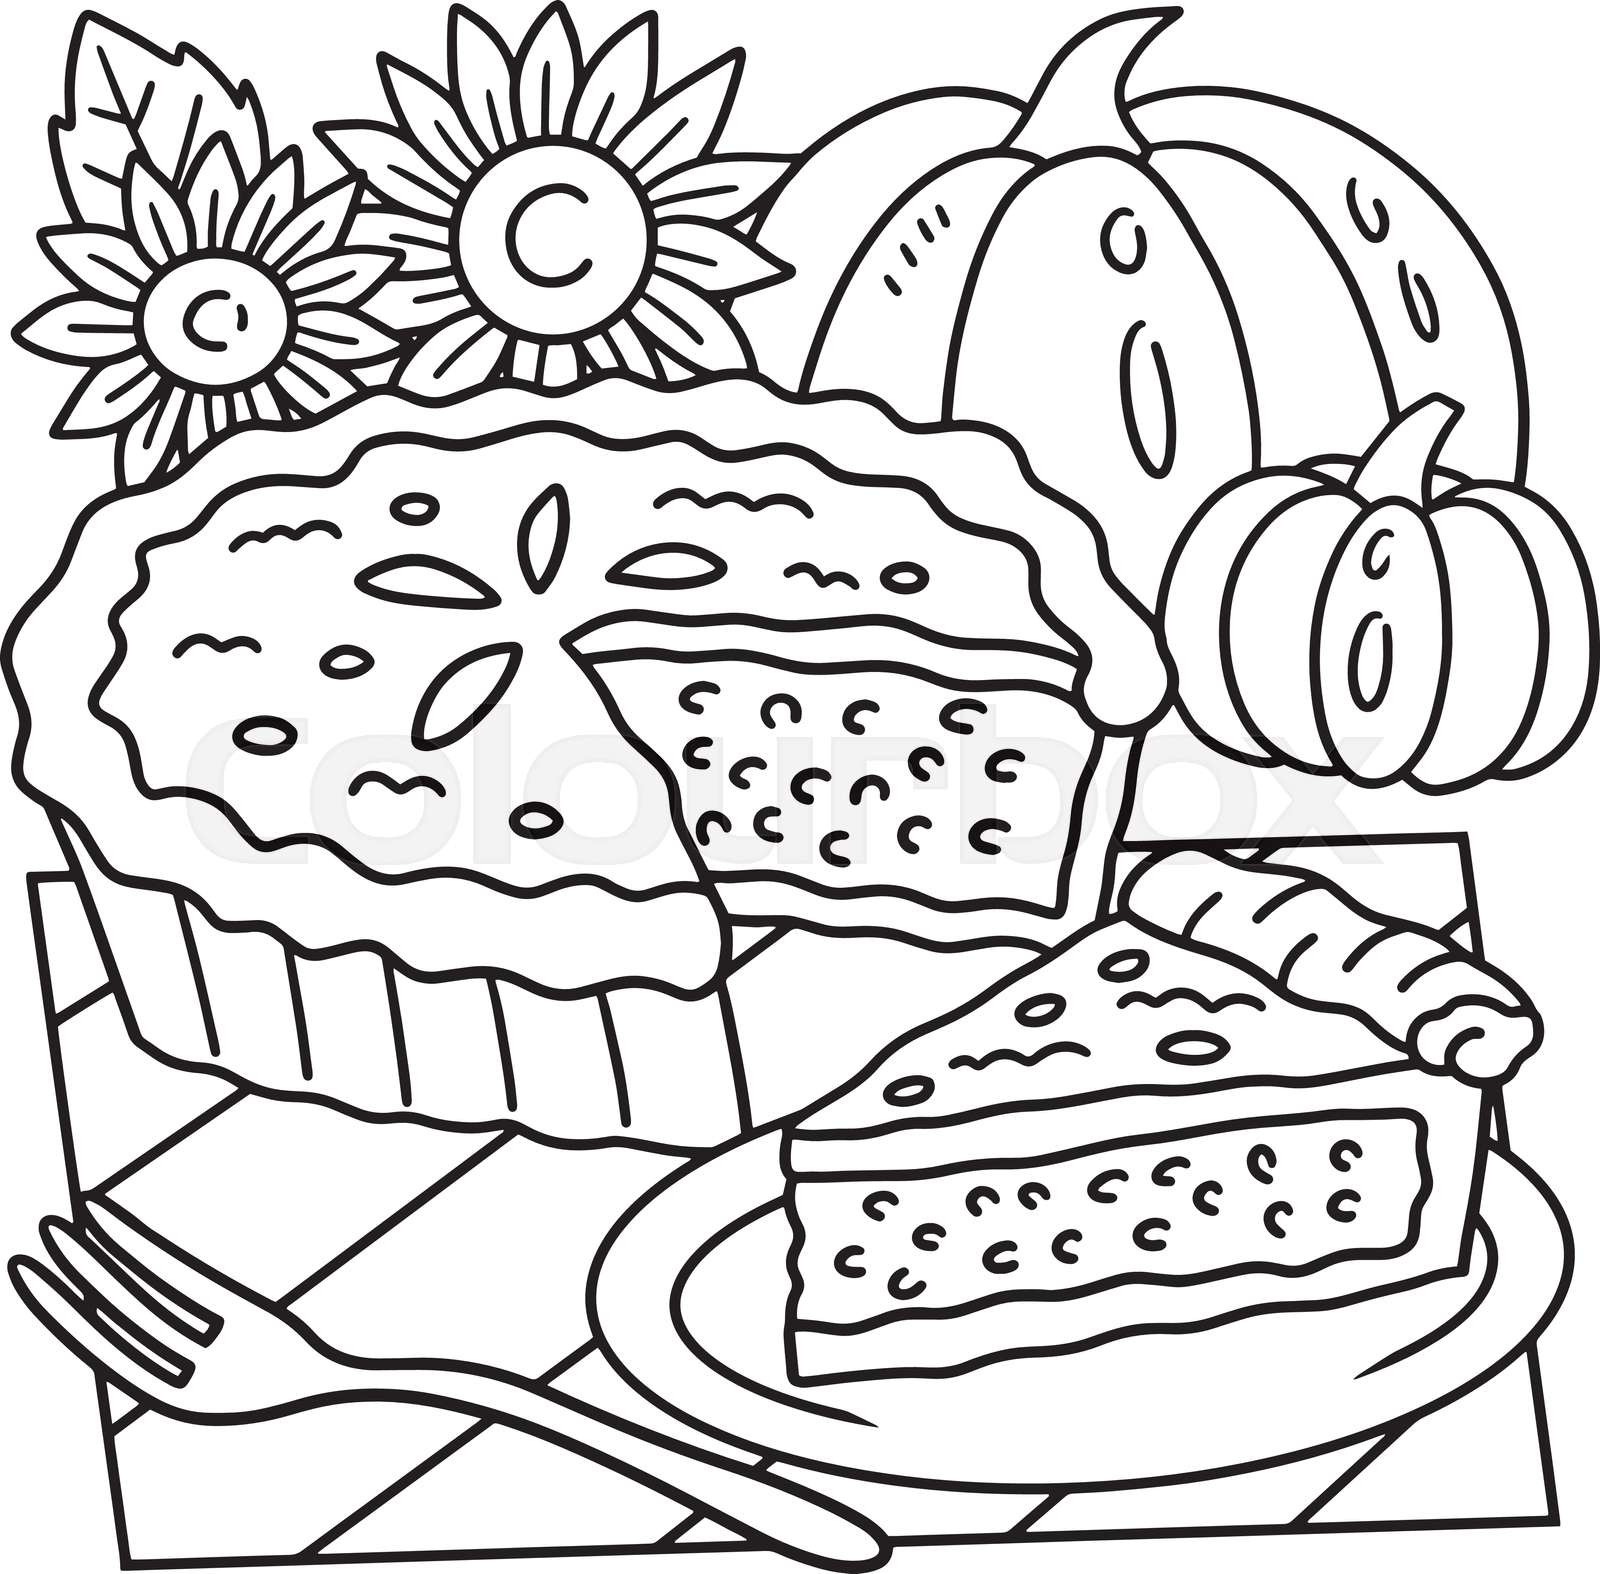 Thanksgiving pumpkin pie coloring page for kids stock vector